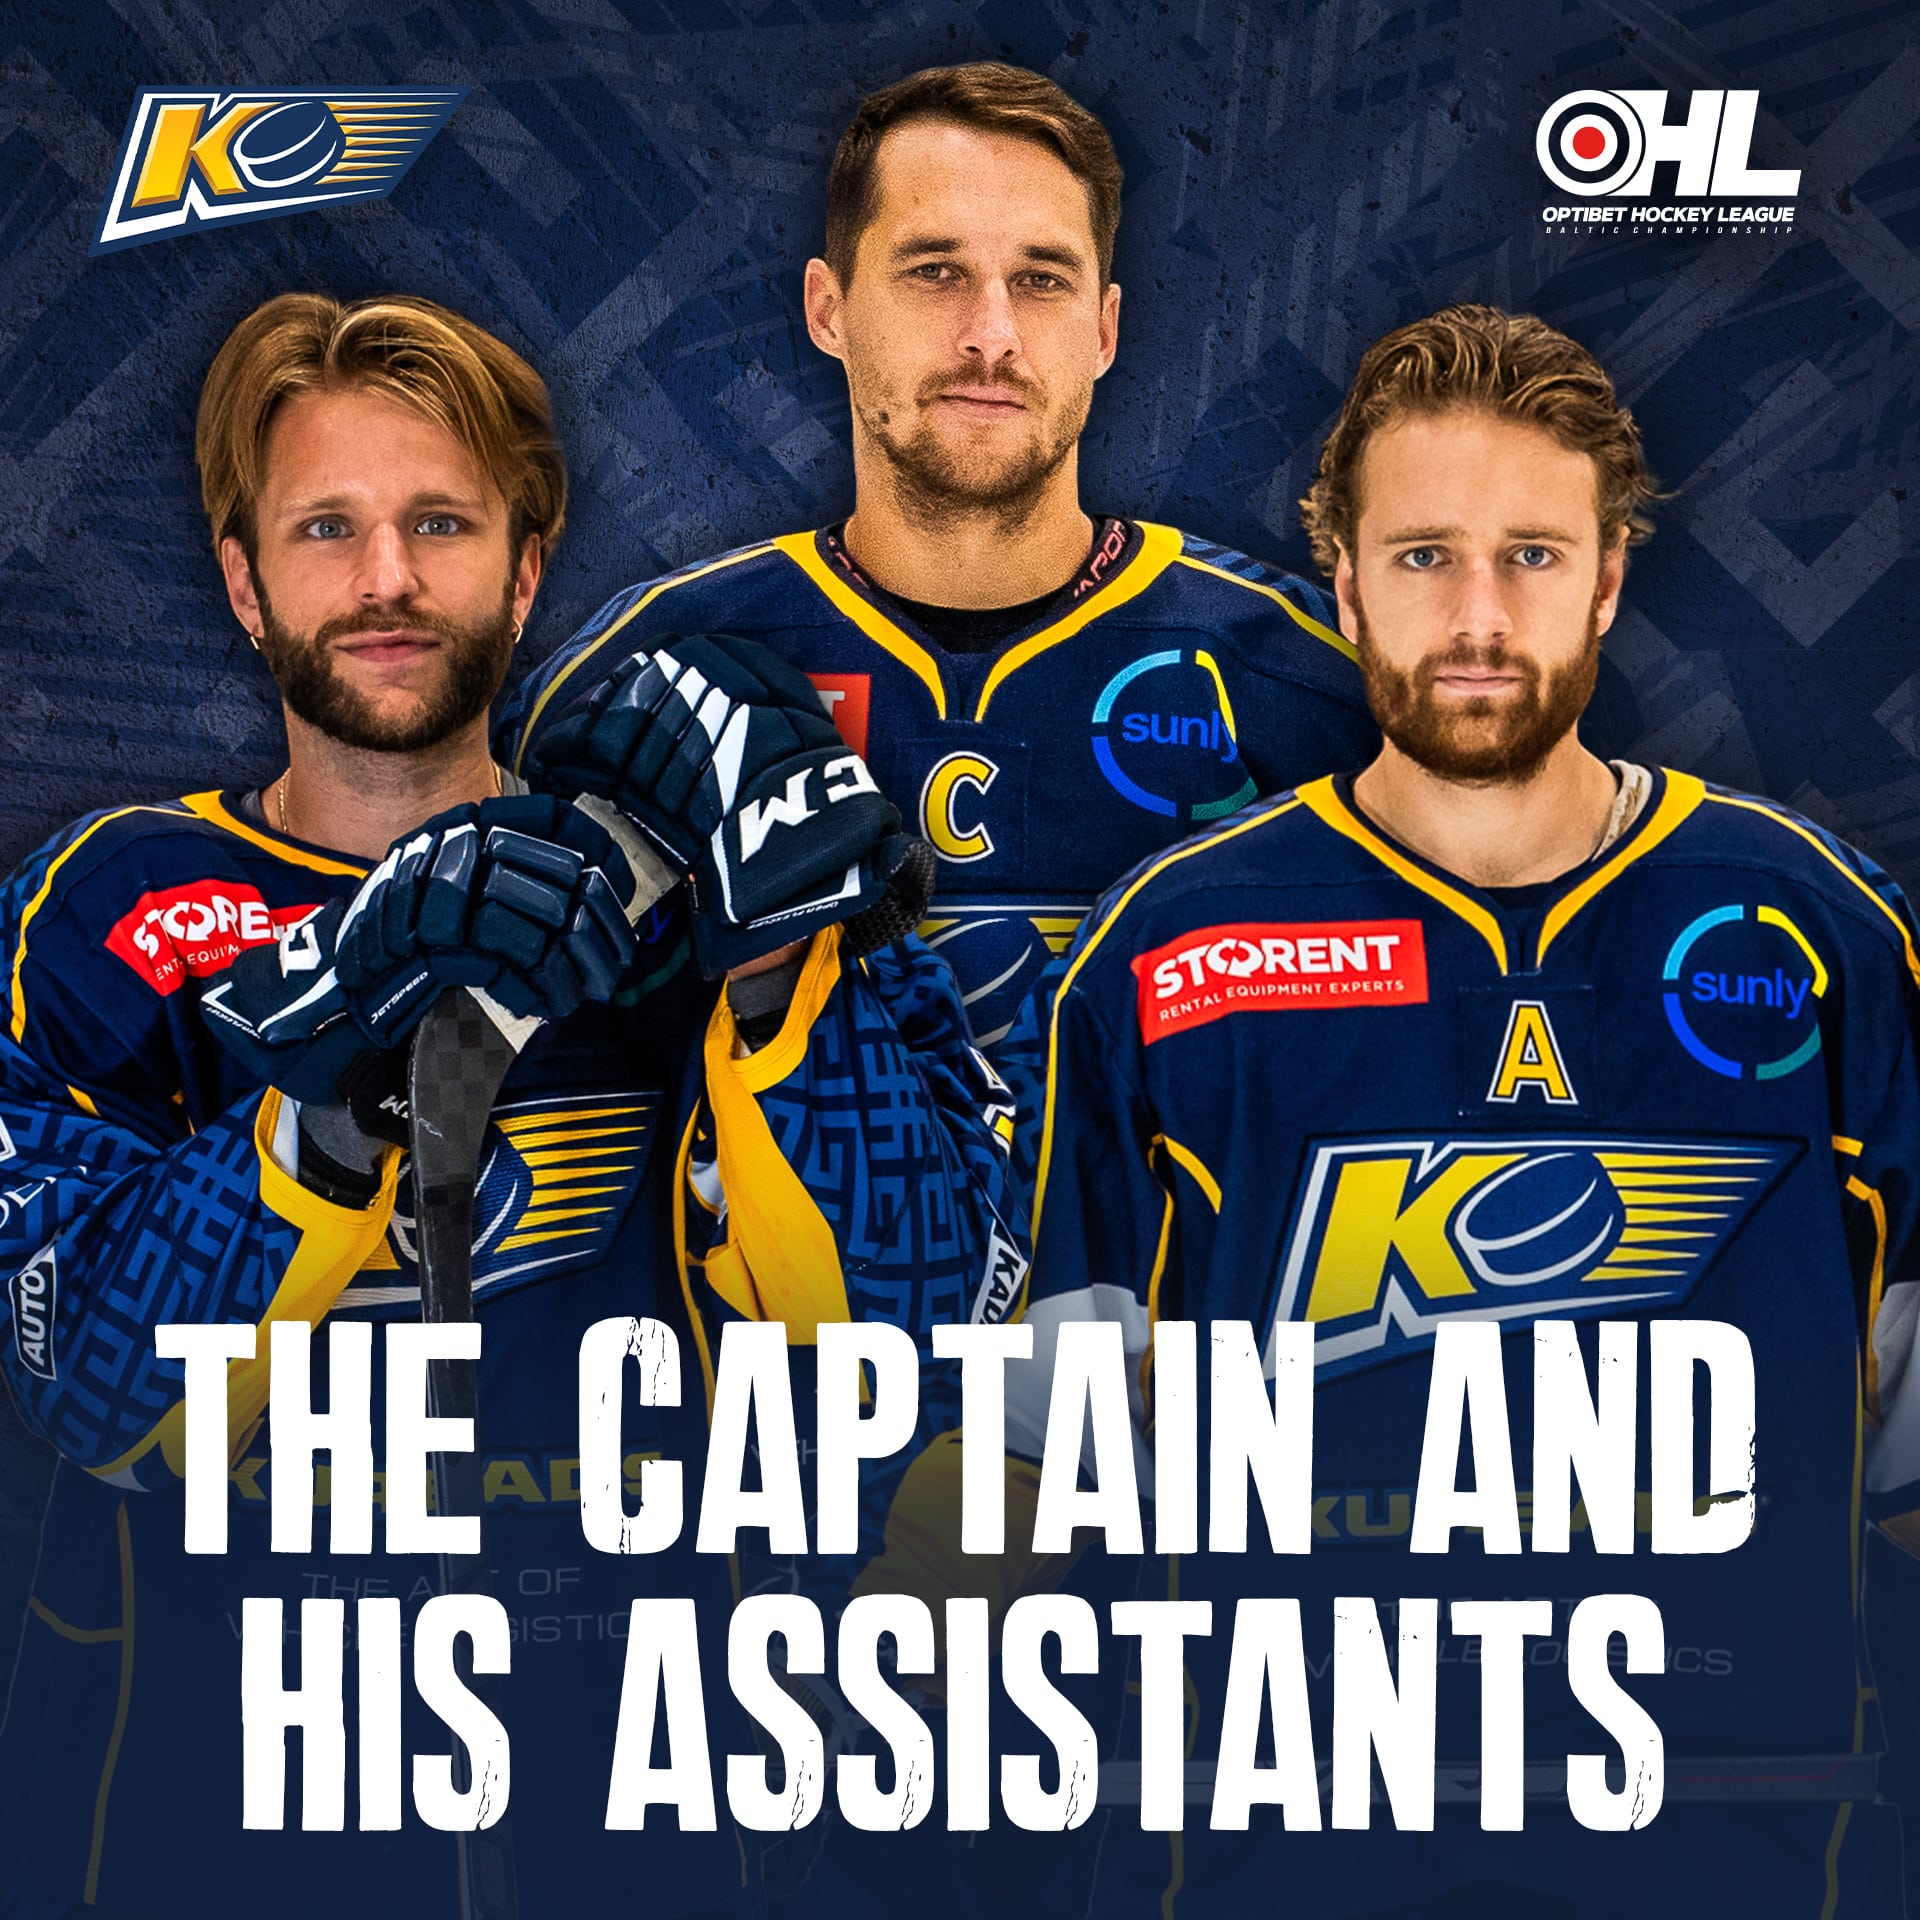 The captain and assistants of the HK Kurbads team for the season 2023/2024!